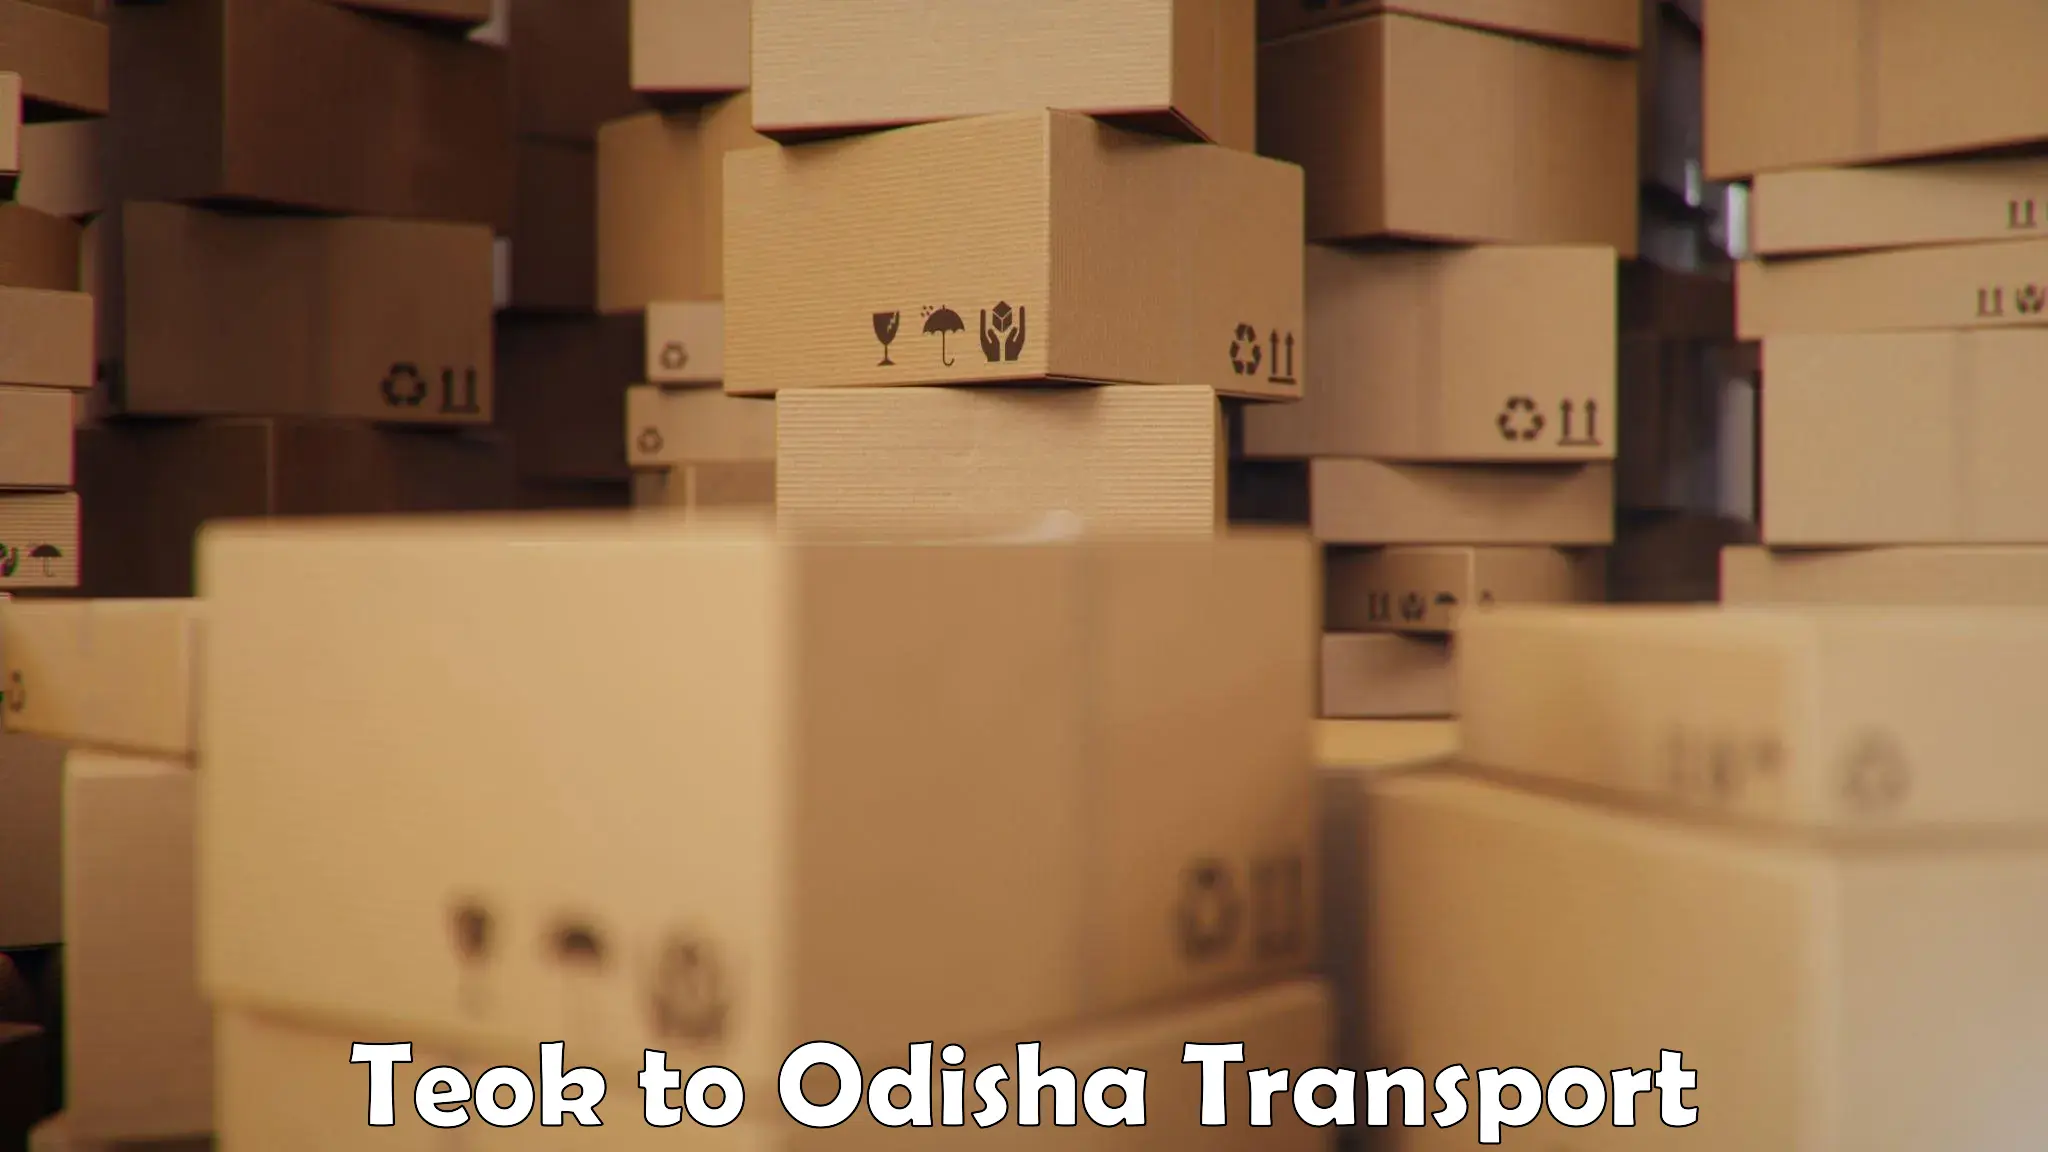 Air freight transport services Teok to Odisha